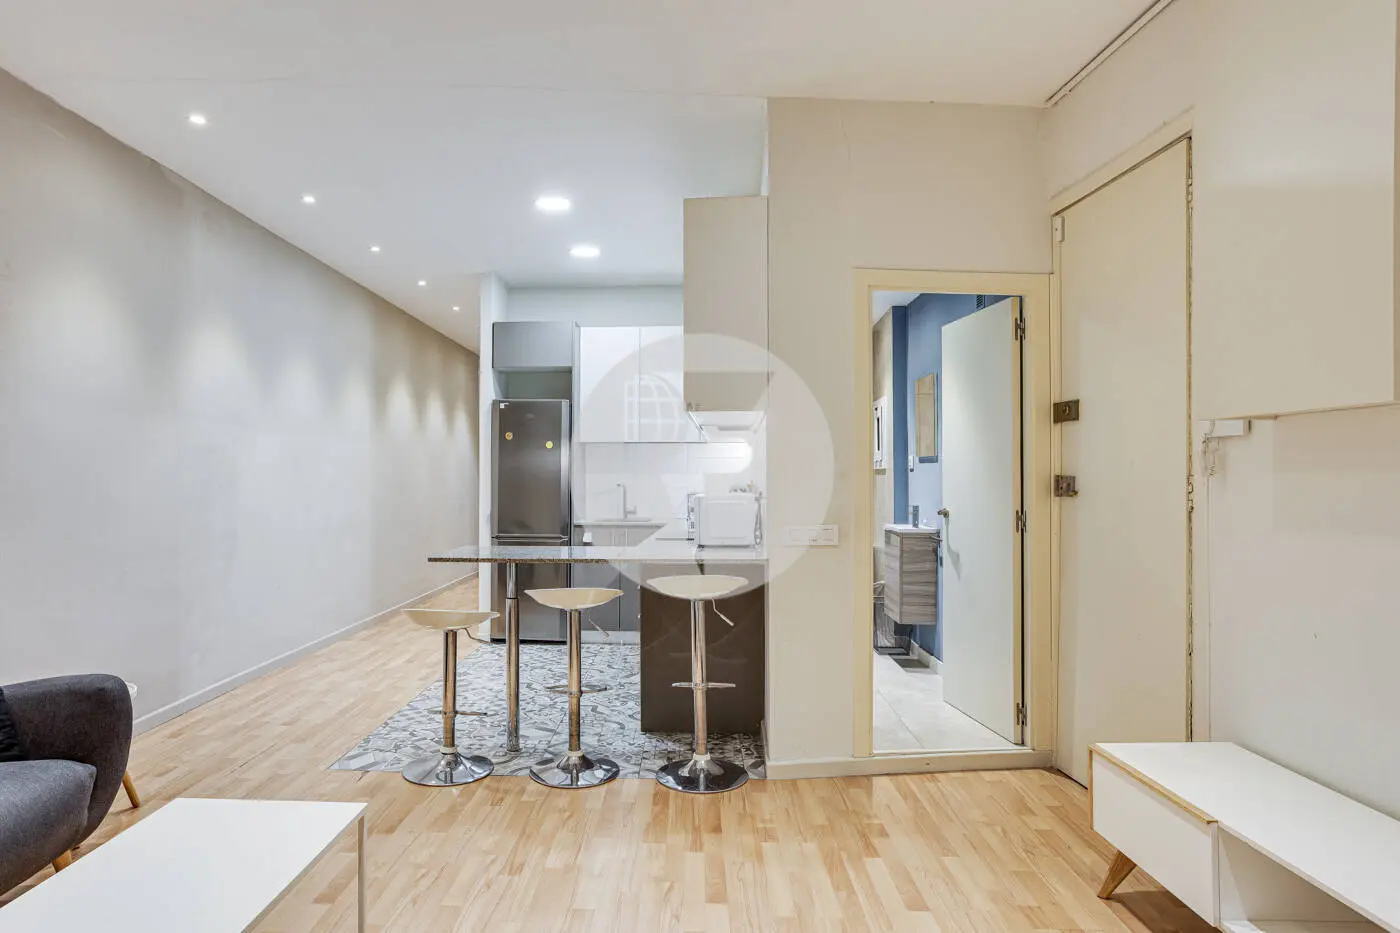 Magnificent apartment for sale next to Pl Universitat of 114m2 according to the land registry, located on Tallers Street in the Ciutat Vella neighborhood of Barcelona 7